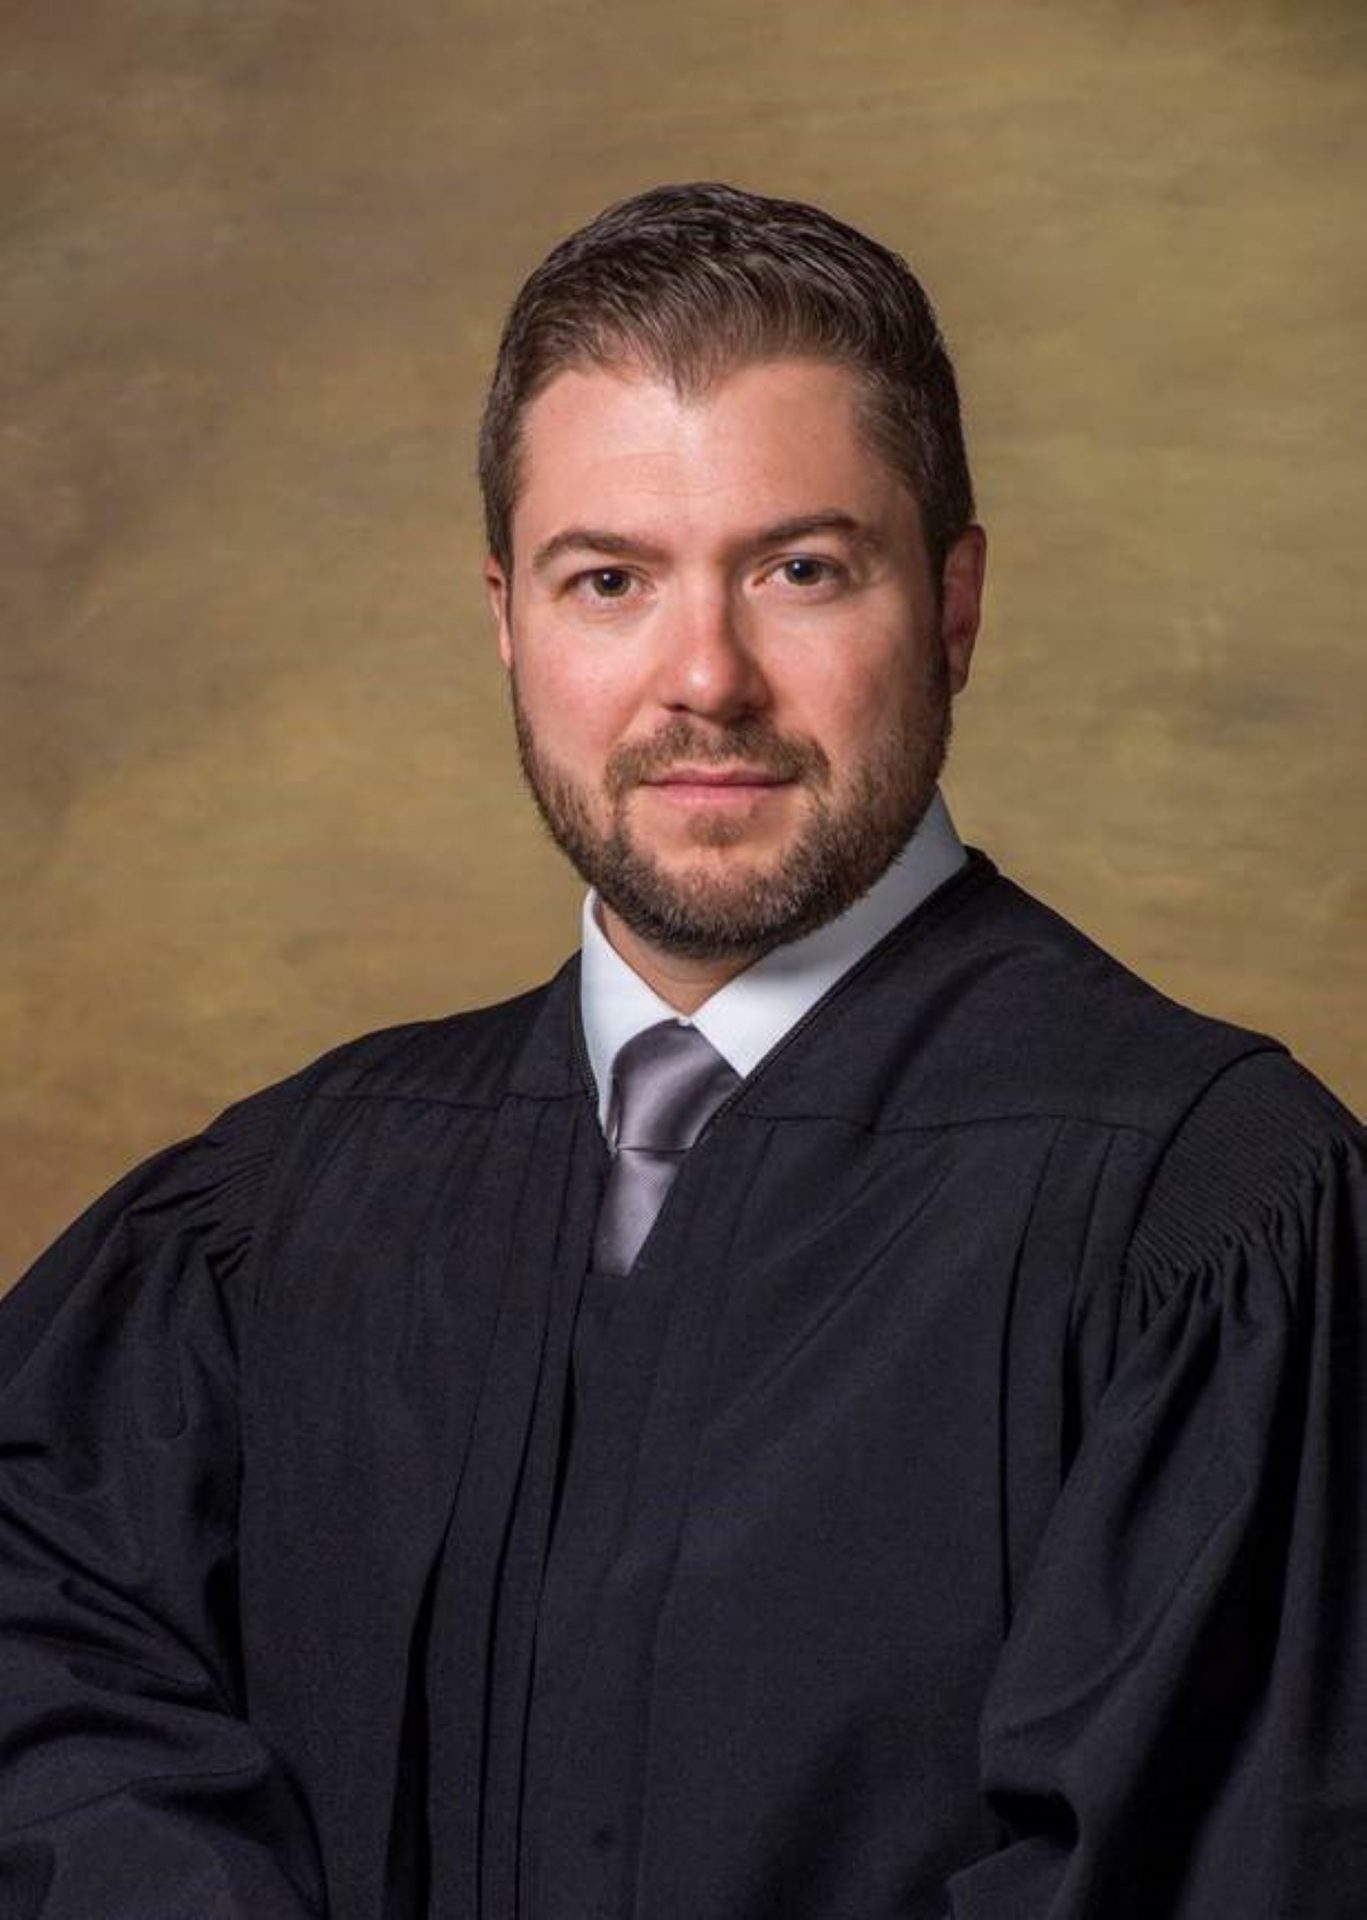 Pittsburgh-based U.S. District Judge William S. Stickman IV found Wolf’s stay-at-home and business closure orders, along with restrictions limiting indoor and outdoor gatherings, to be unconstitutional.